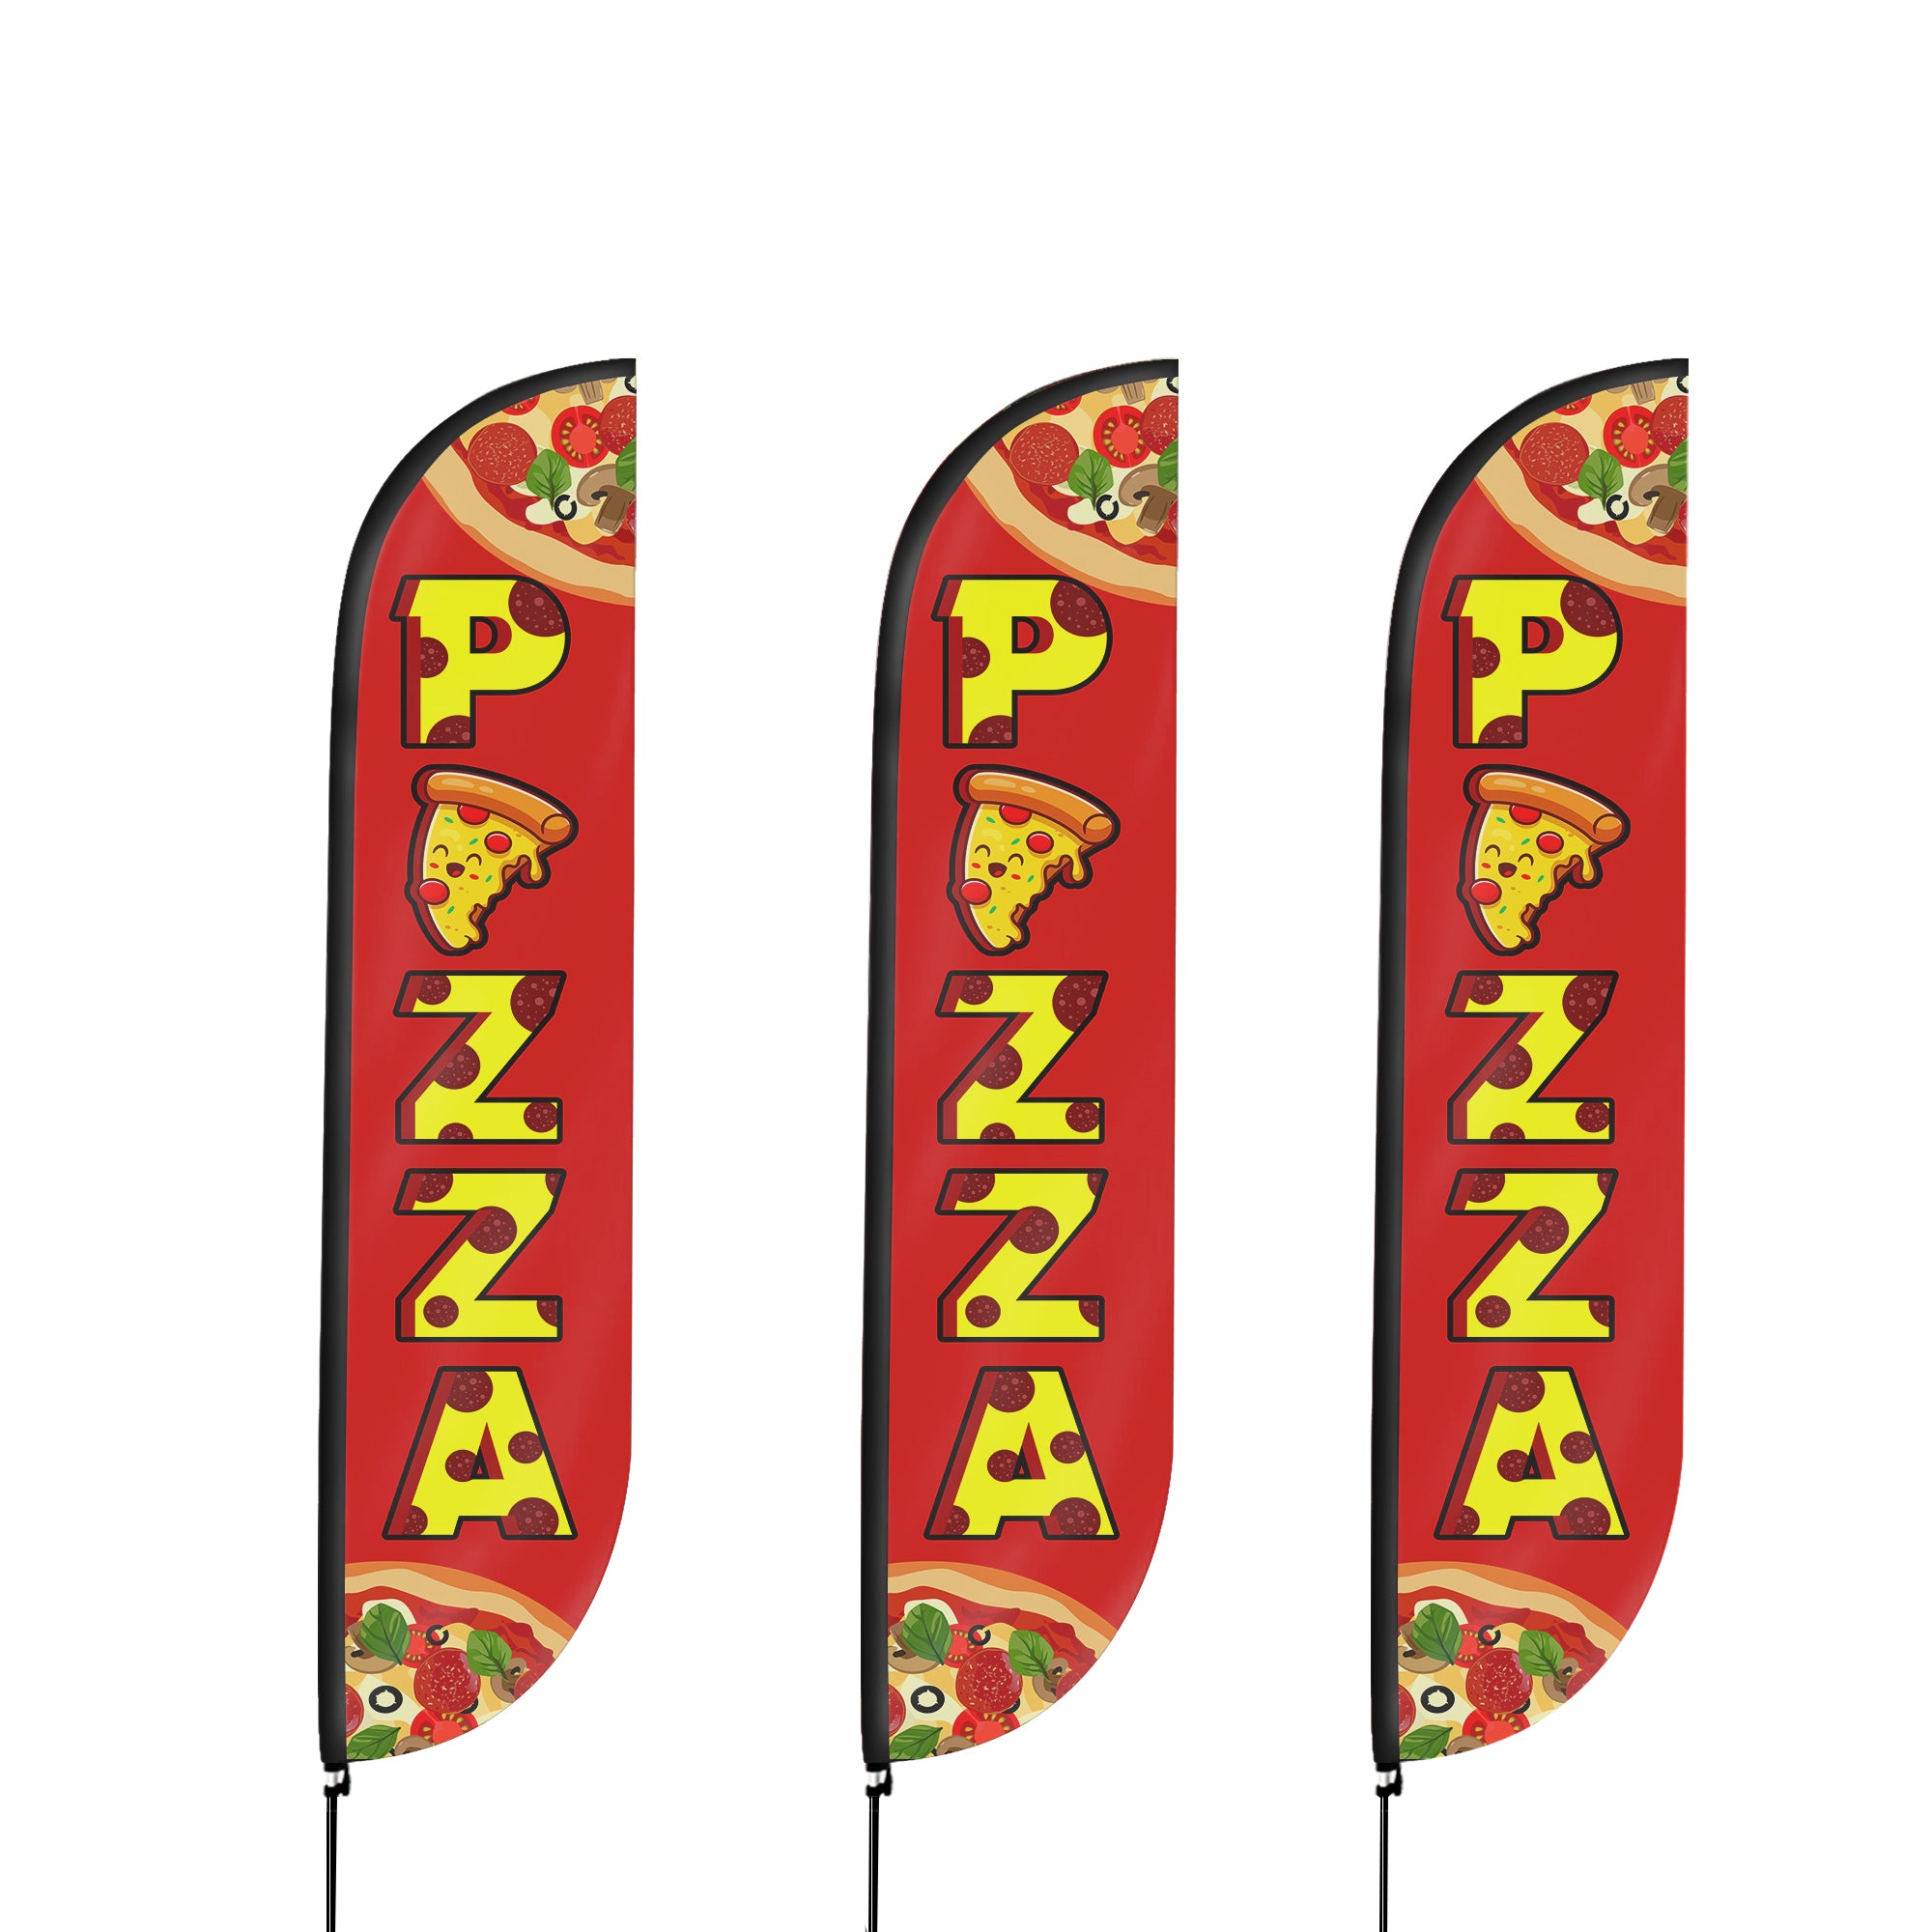 Feather Flag + Pole set 3 Pieces Feather Flag / Swooper Flag